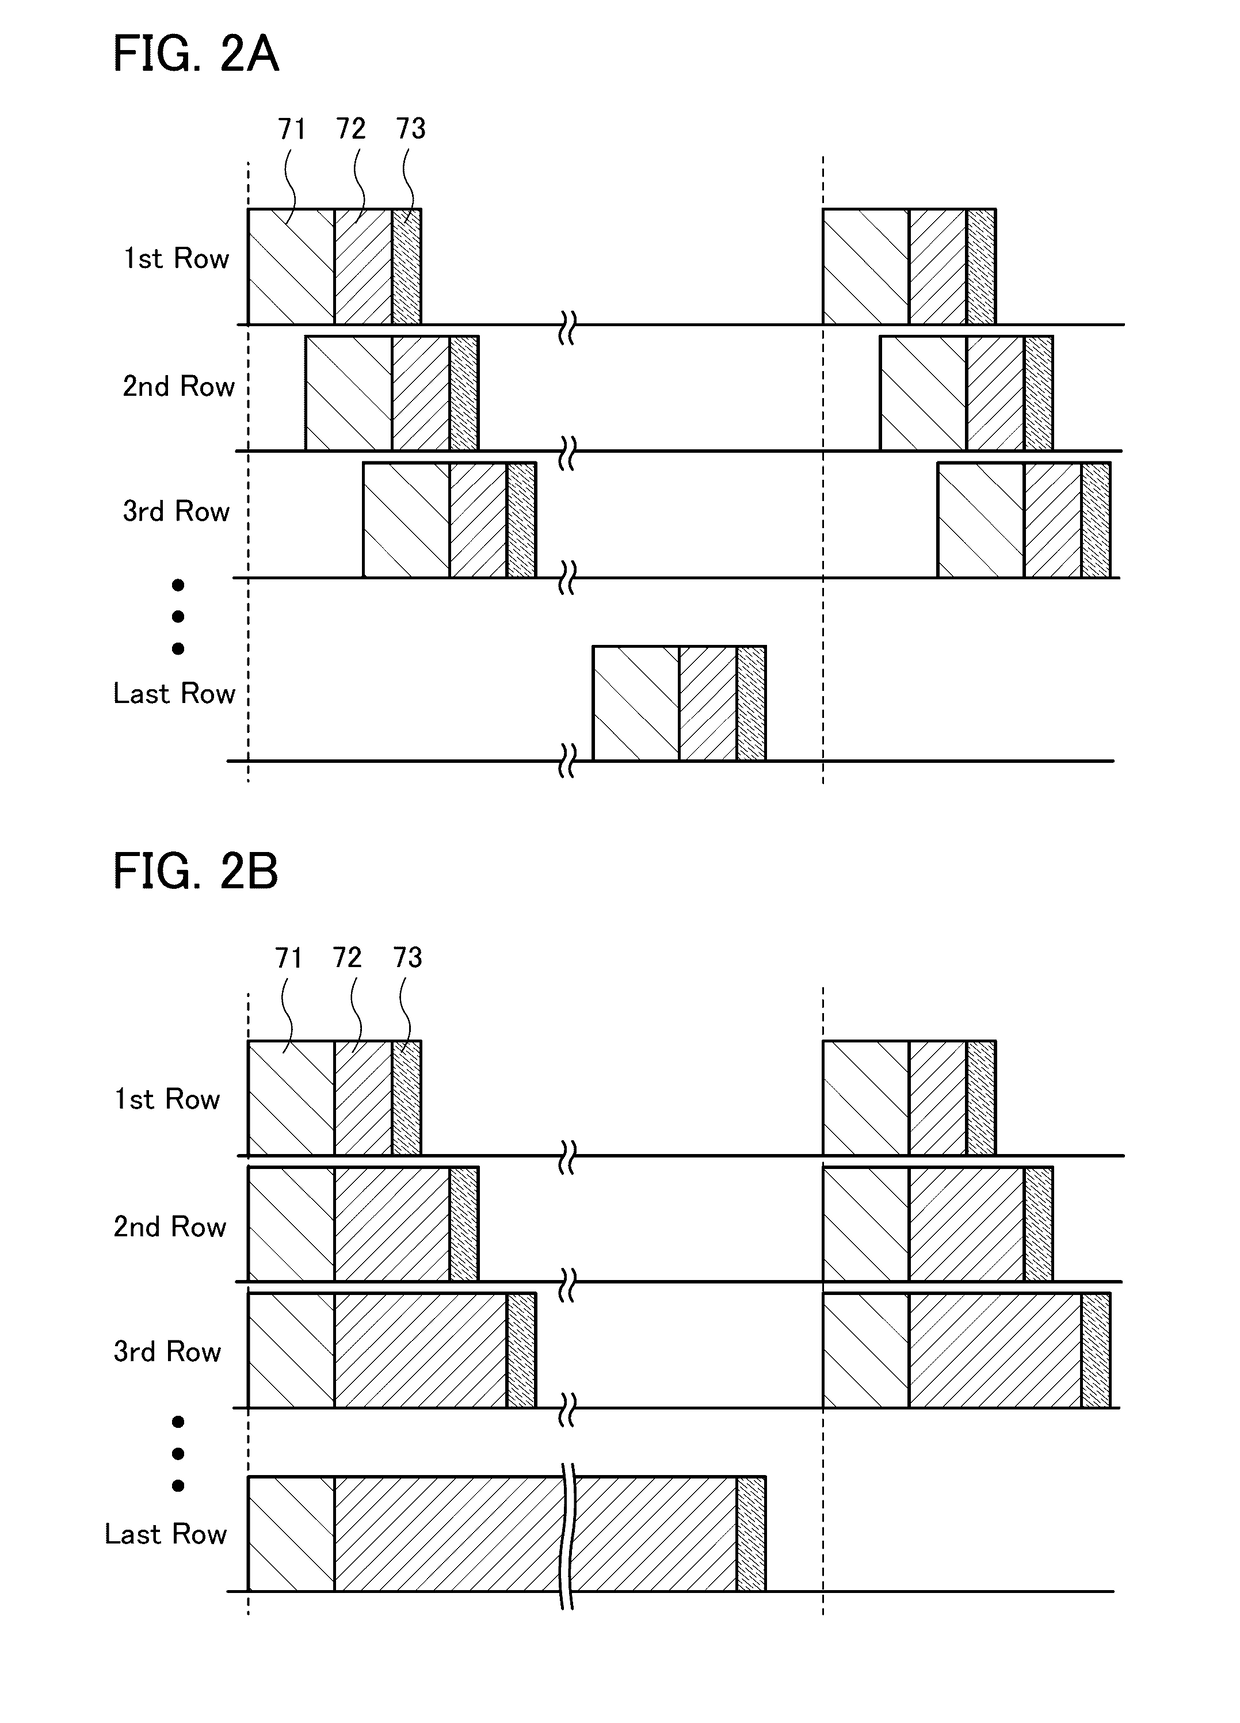 Imaging device, method for operating the same, module, and electronic device